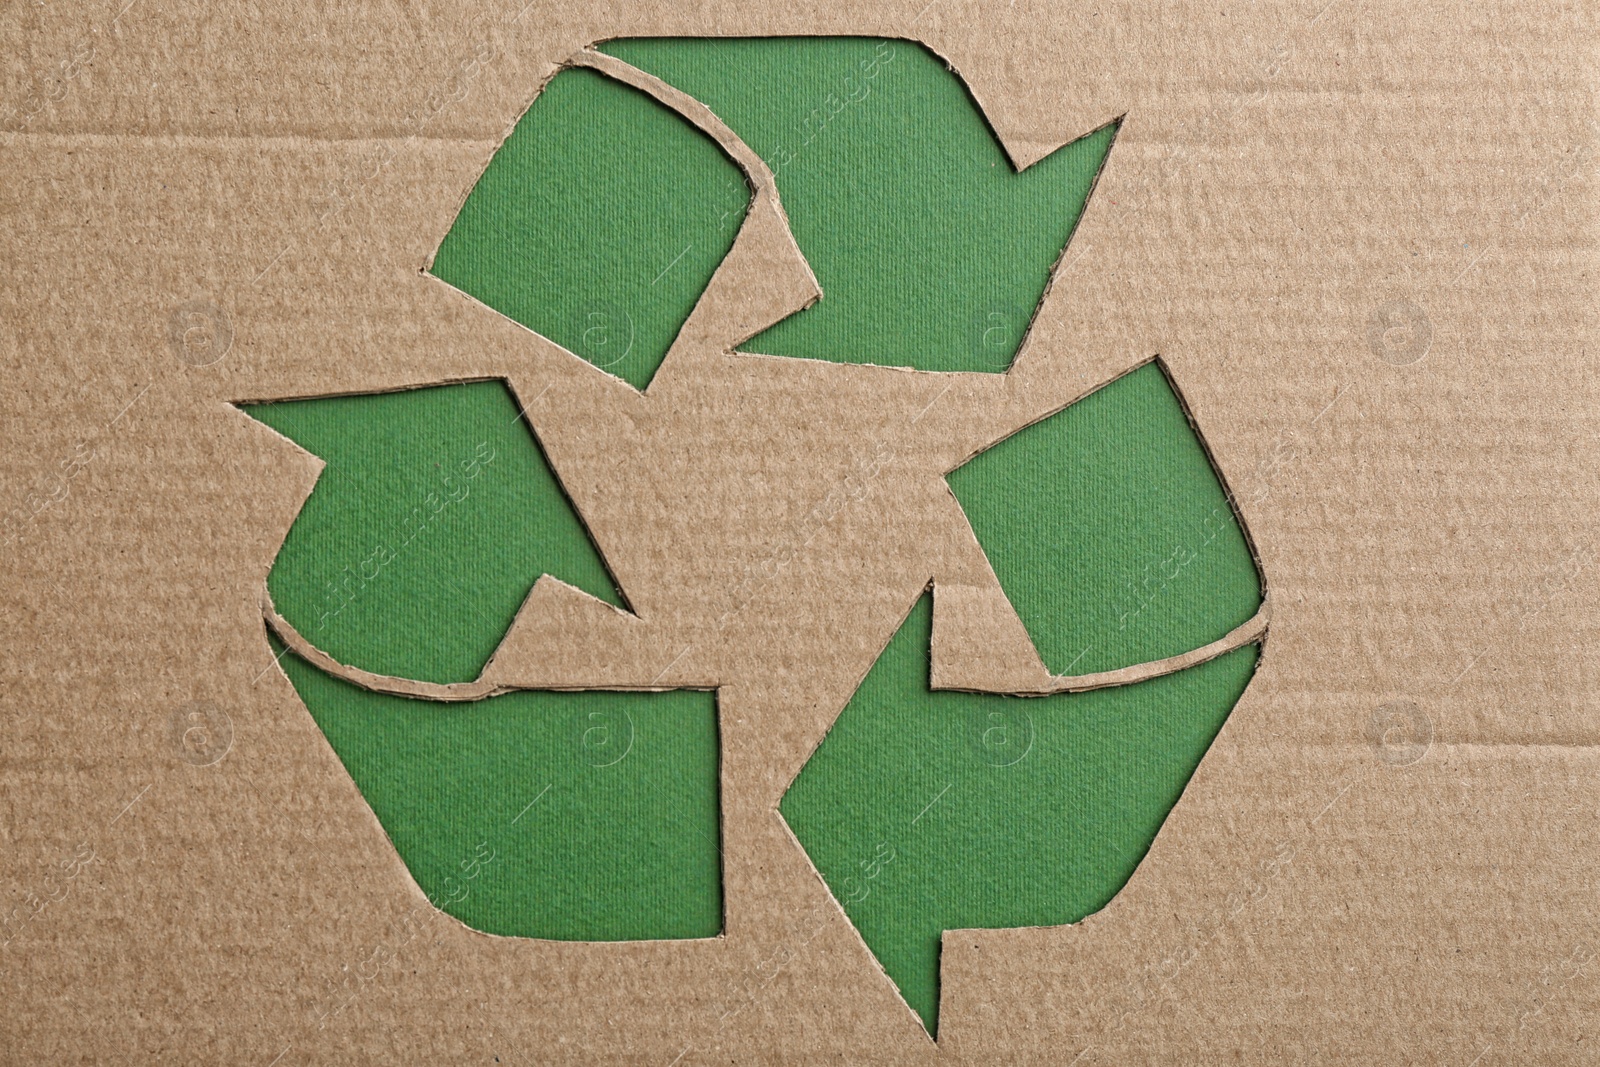 Photo of Sheet of cardboard with cutout recycling symbol on green background, top view